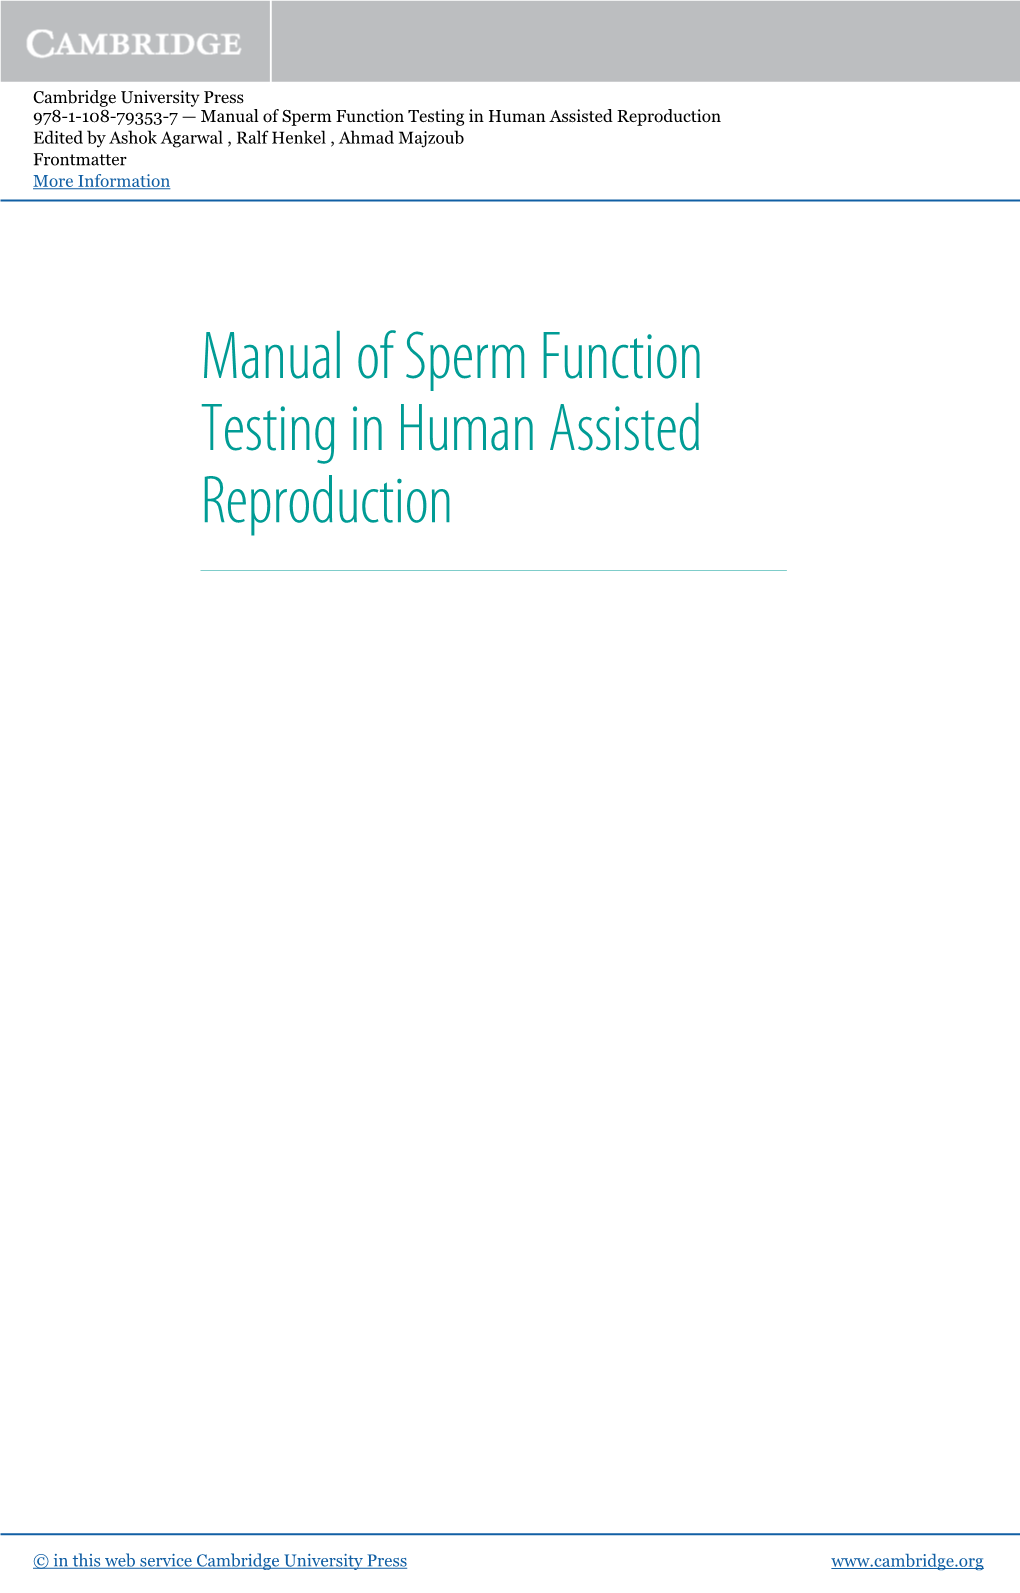 Manual of Sperm Function Testing in Human Assisted Reproduction Edited by Ashok Agarwal , Ralf Henkel , Ahmad Majzoub Frontmatter More Information